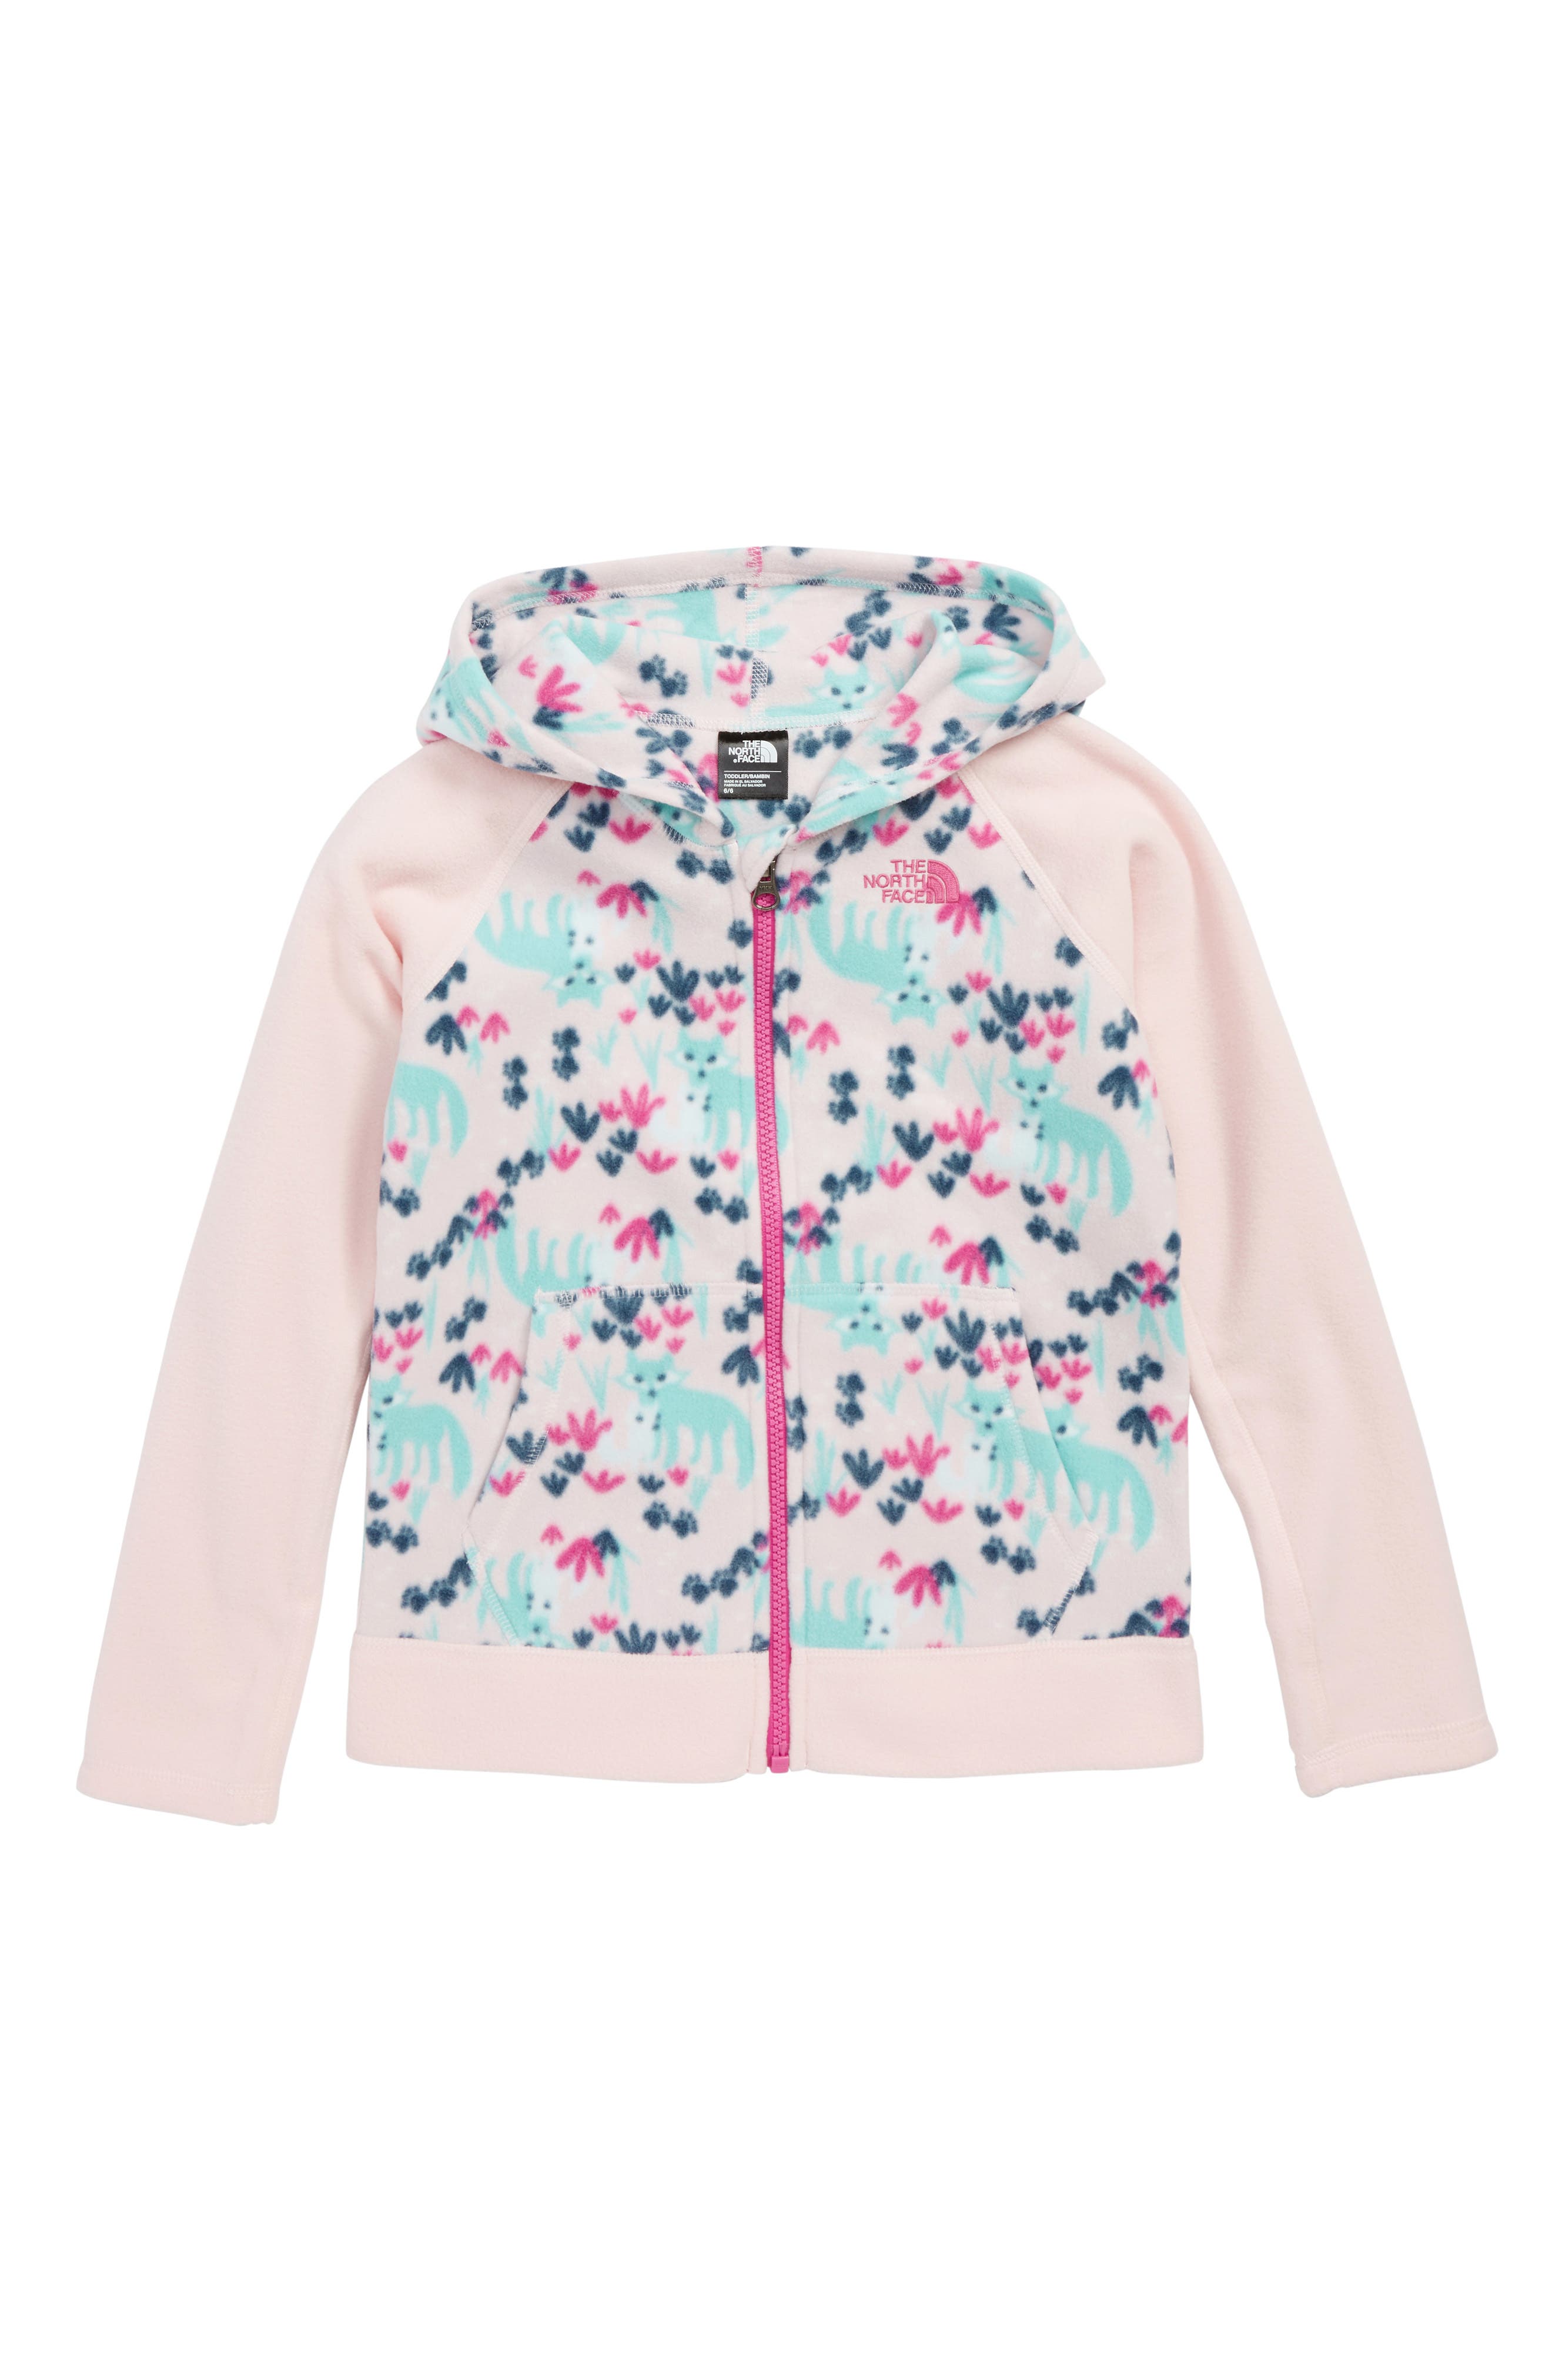 the north face toddler glacier full zip hoodie